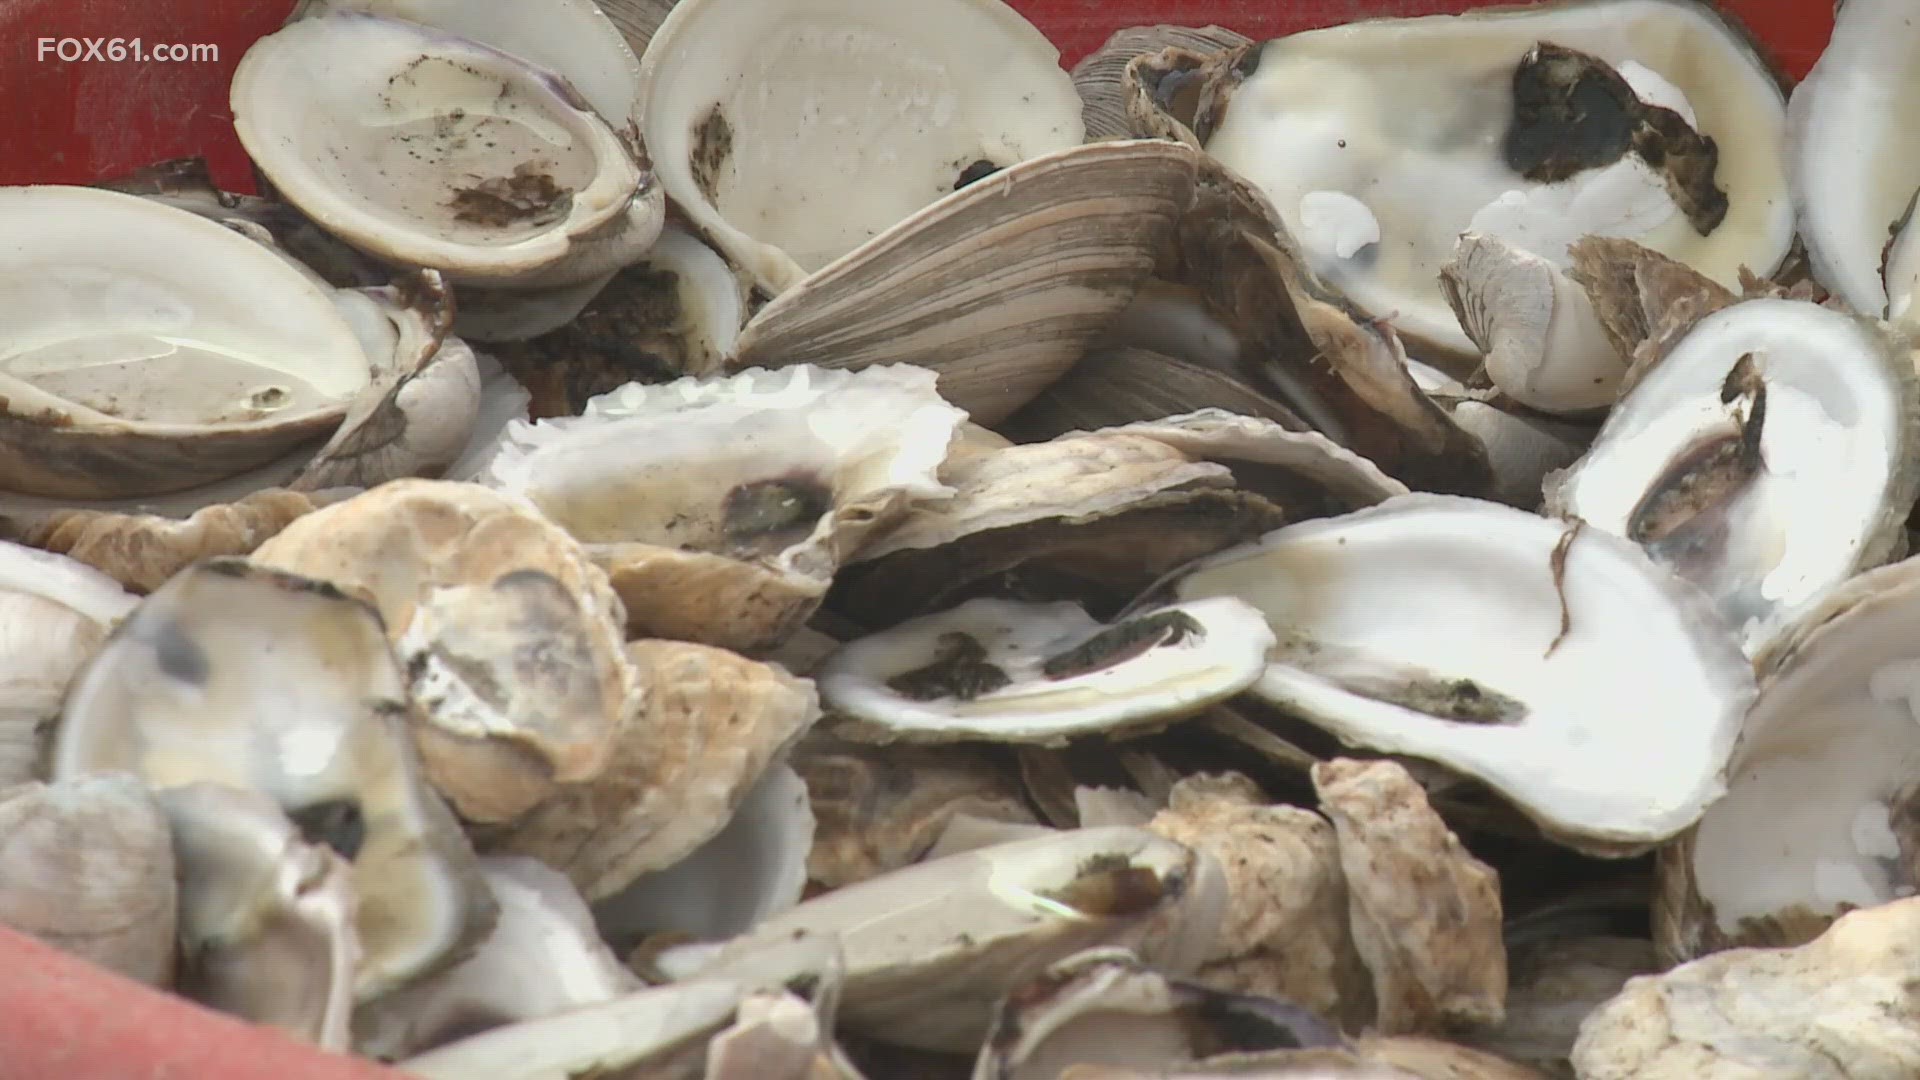 The Connecticut Department of Public Health said the three people infected swam with open wounds and ate raw oysters.